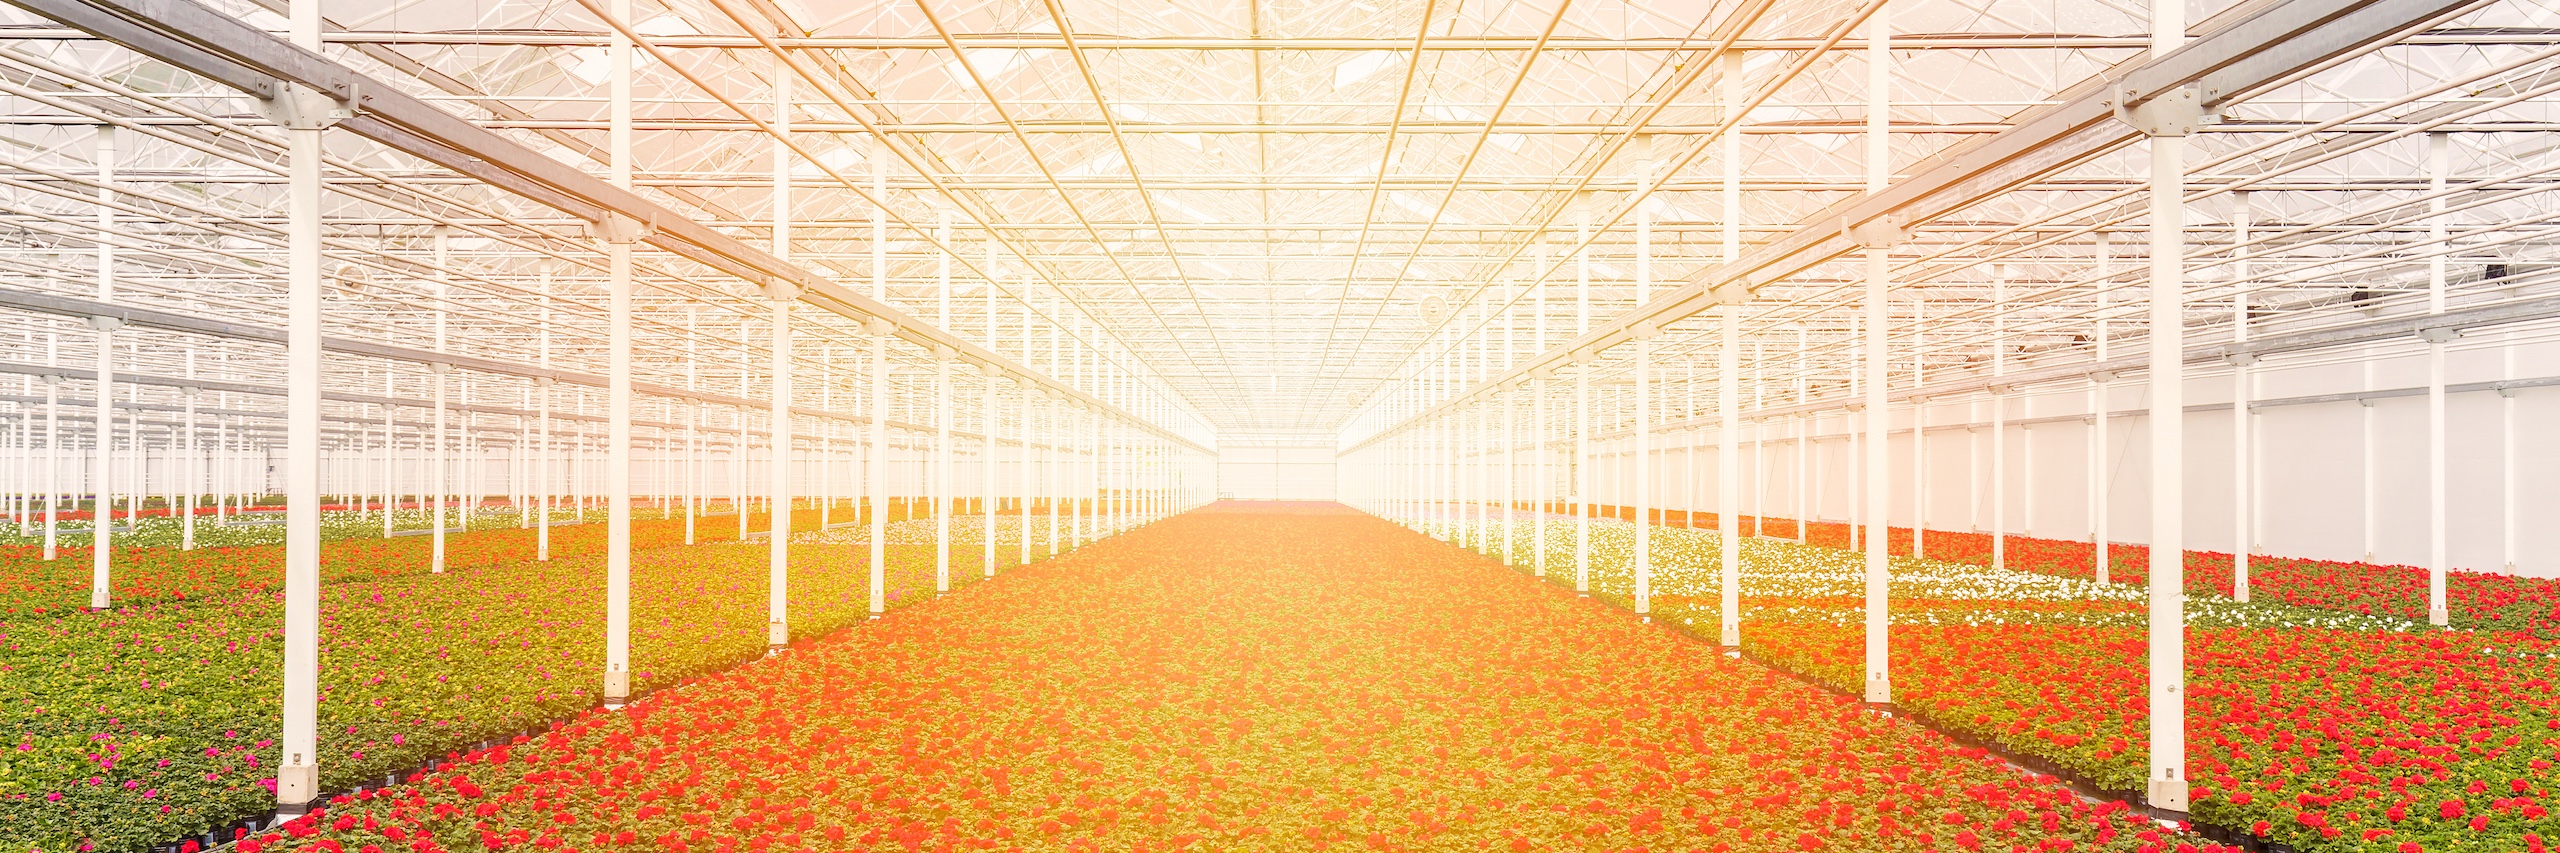 Sunrise over blooming geranium plants in a greenhouse